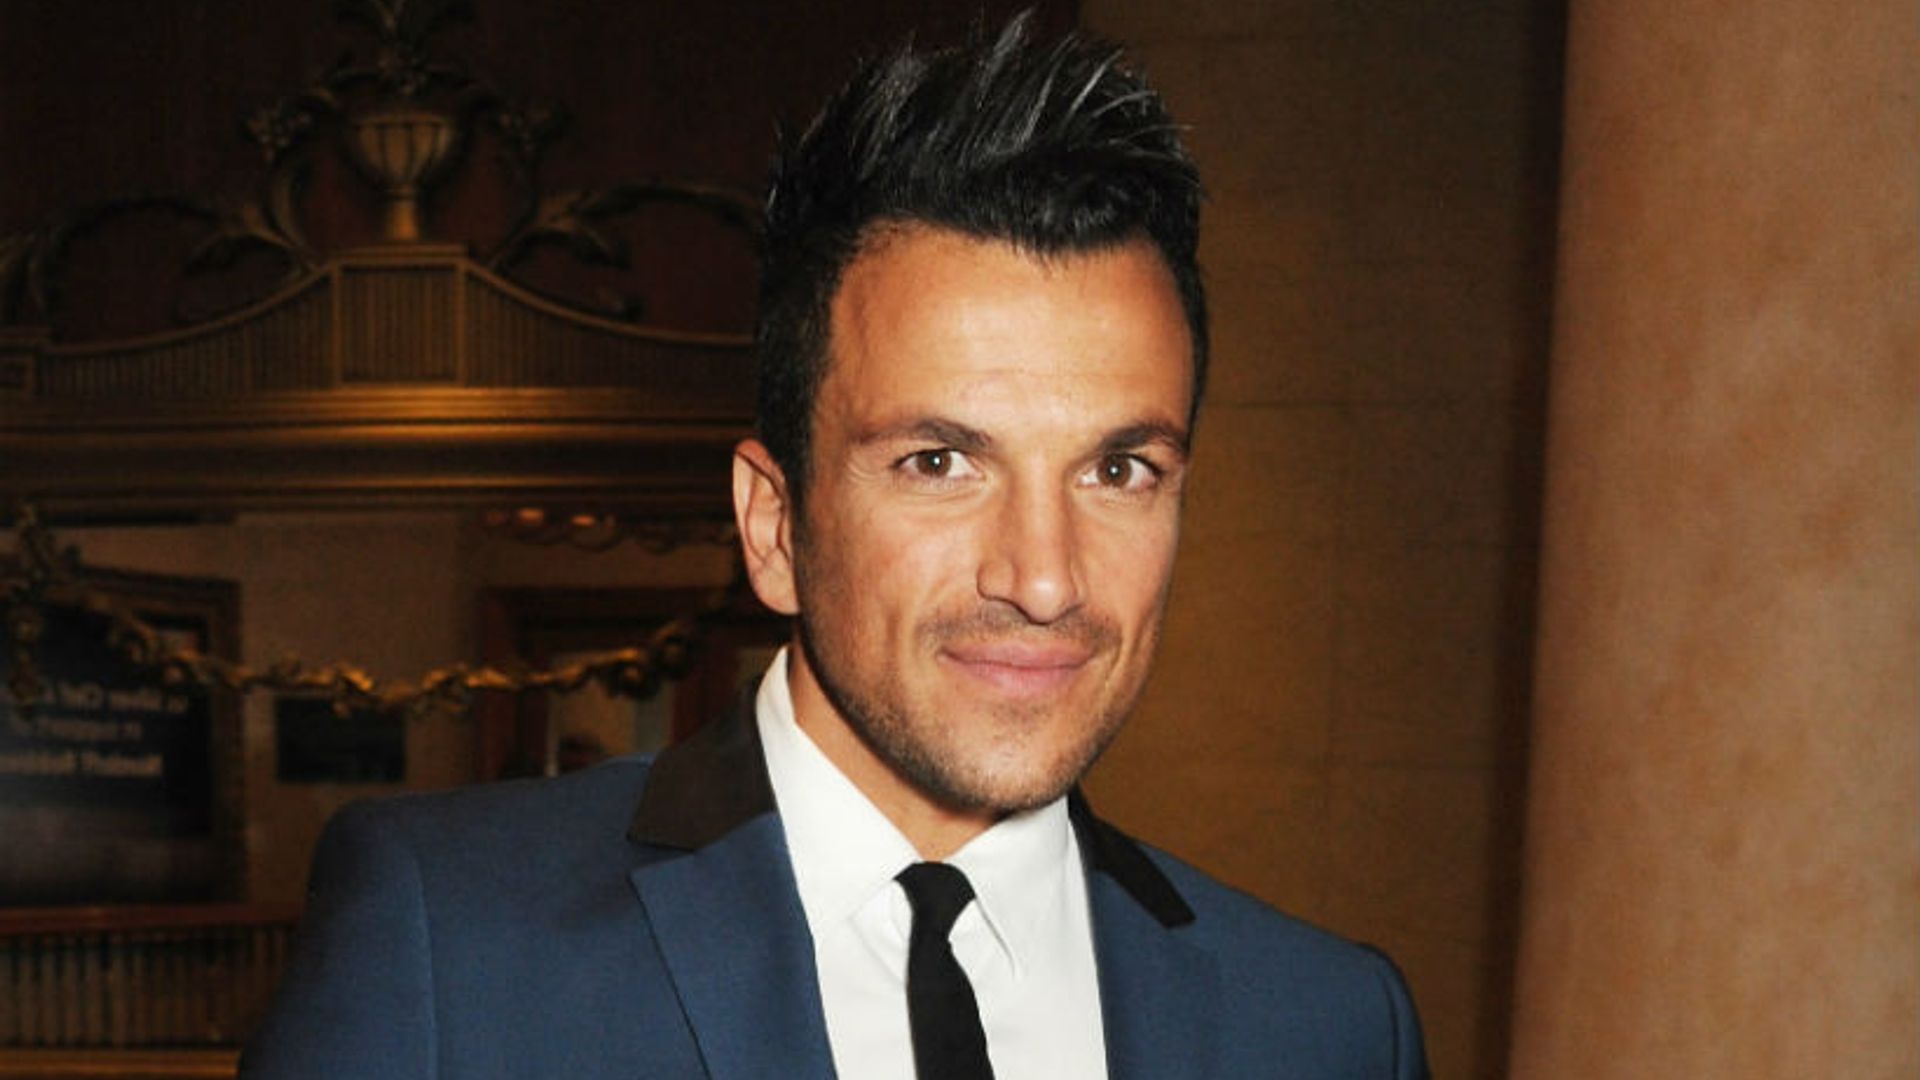 Peter Andre celebrates birthday with wife Emily MacDonagh | HELLO!